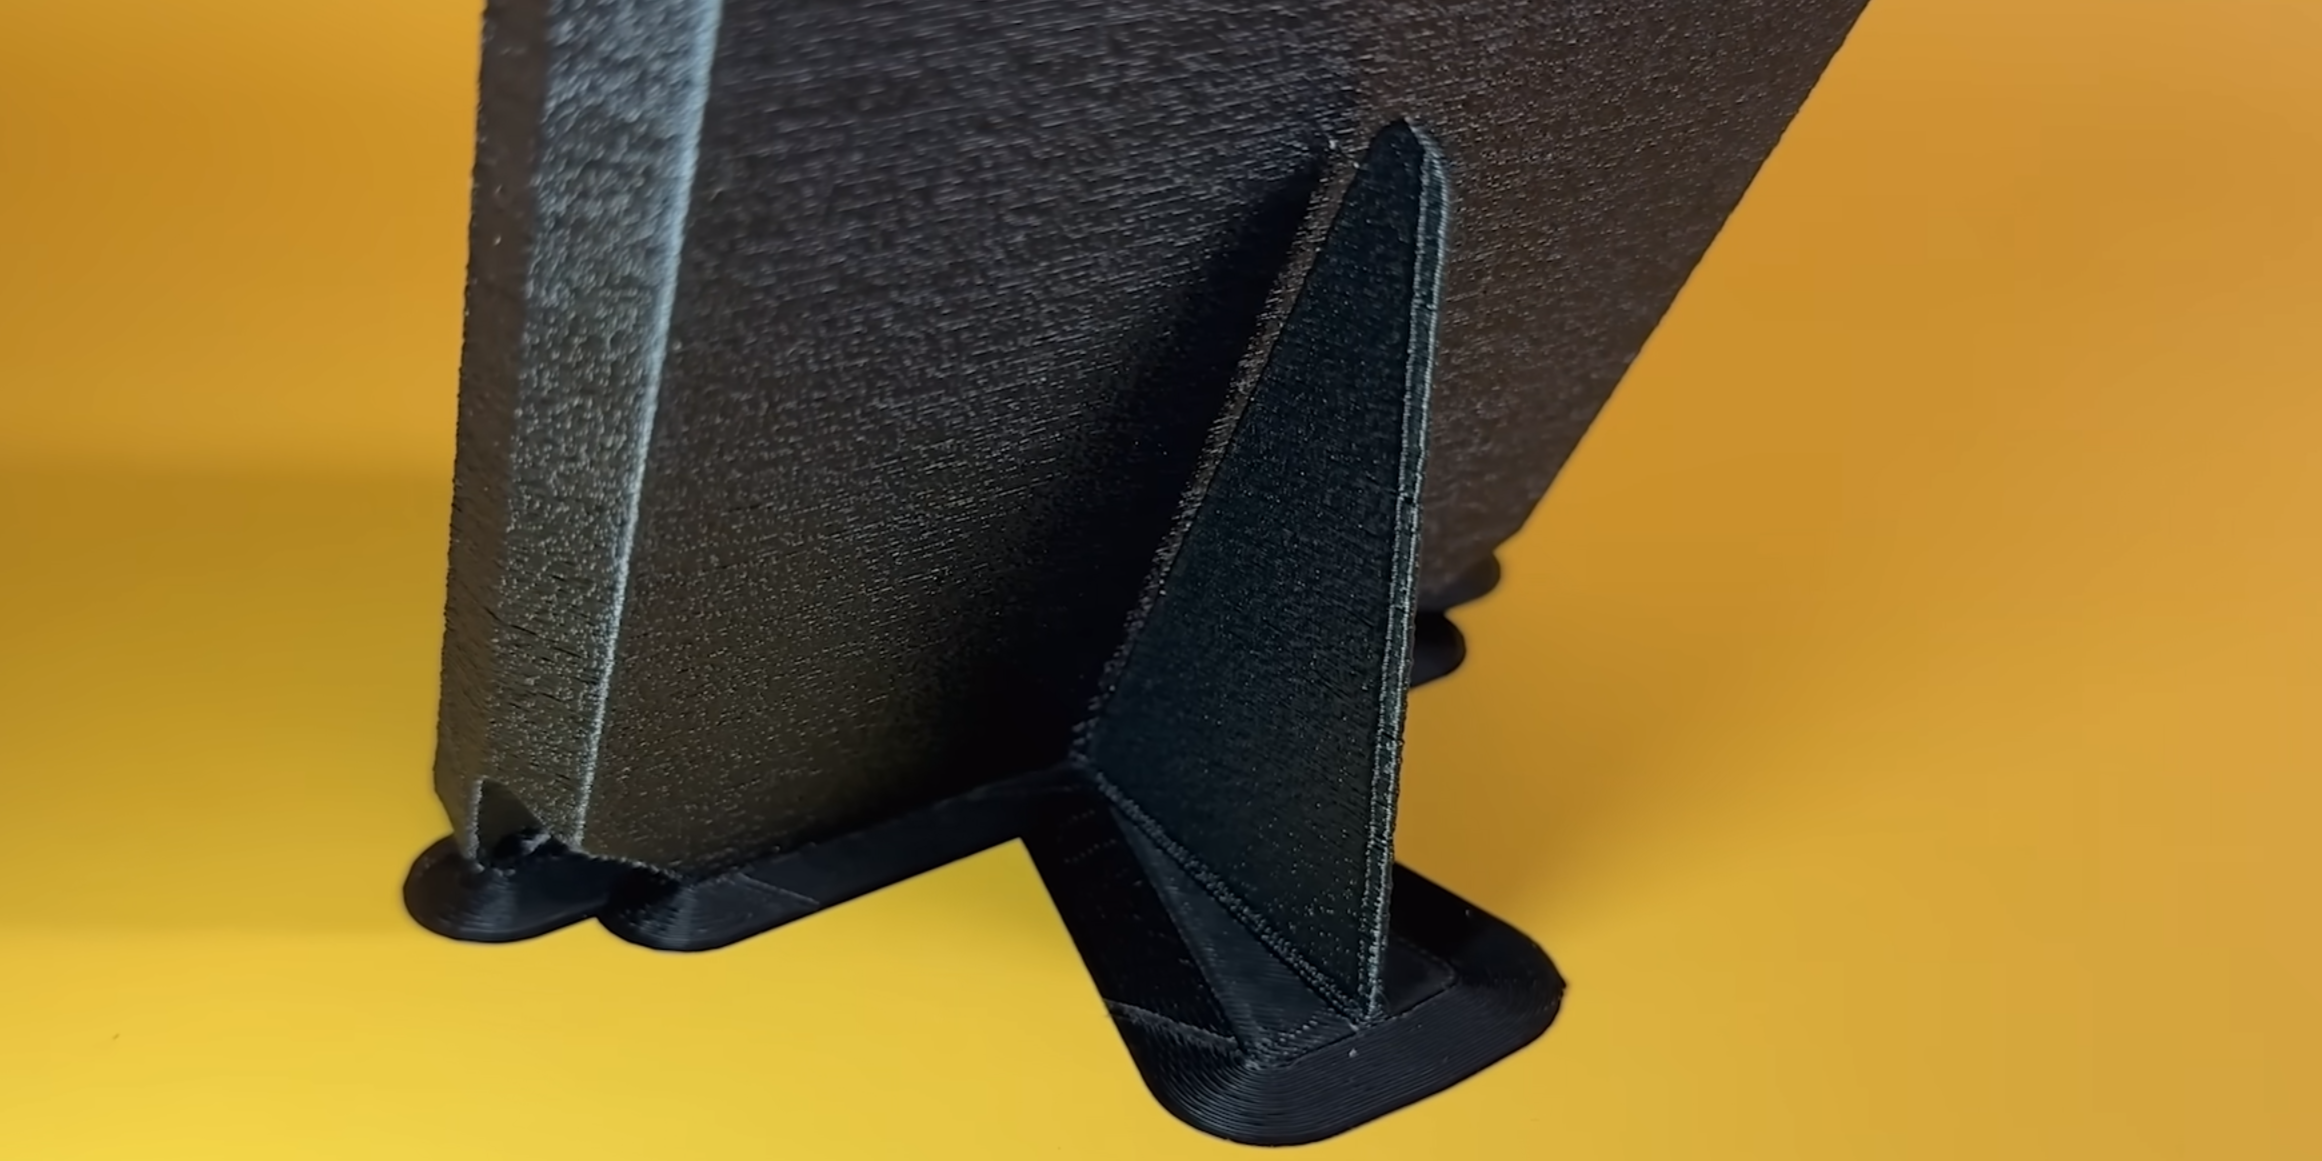 An alternative direction for 3D printed enclosures